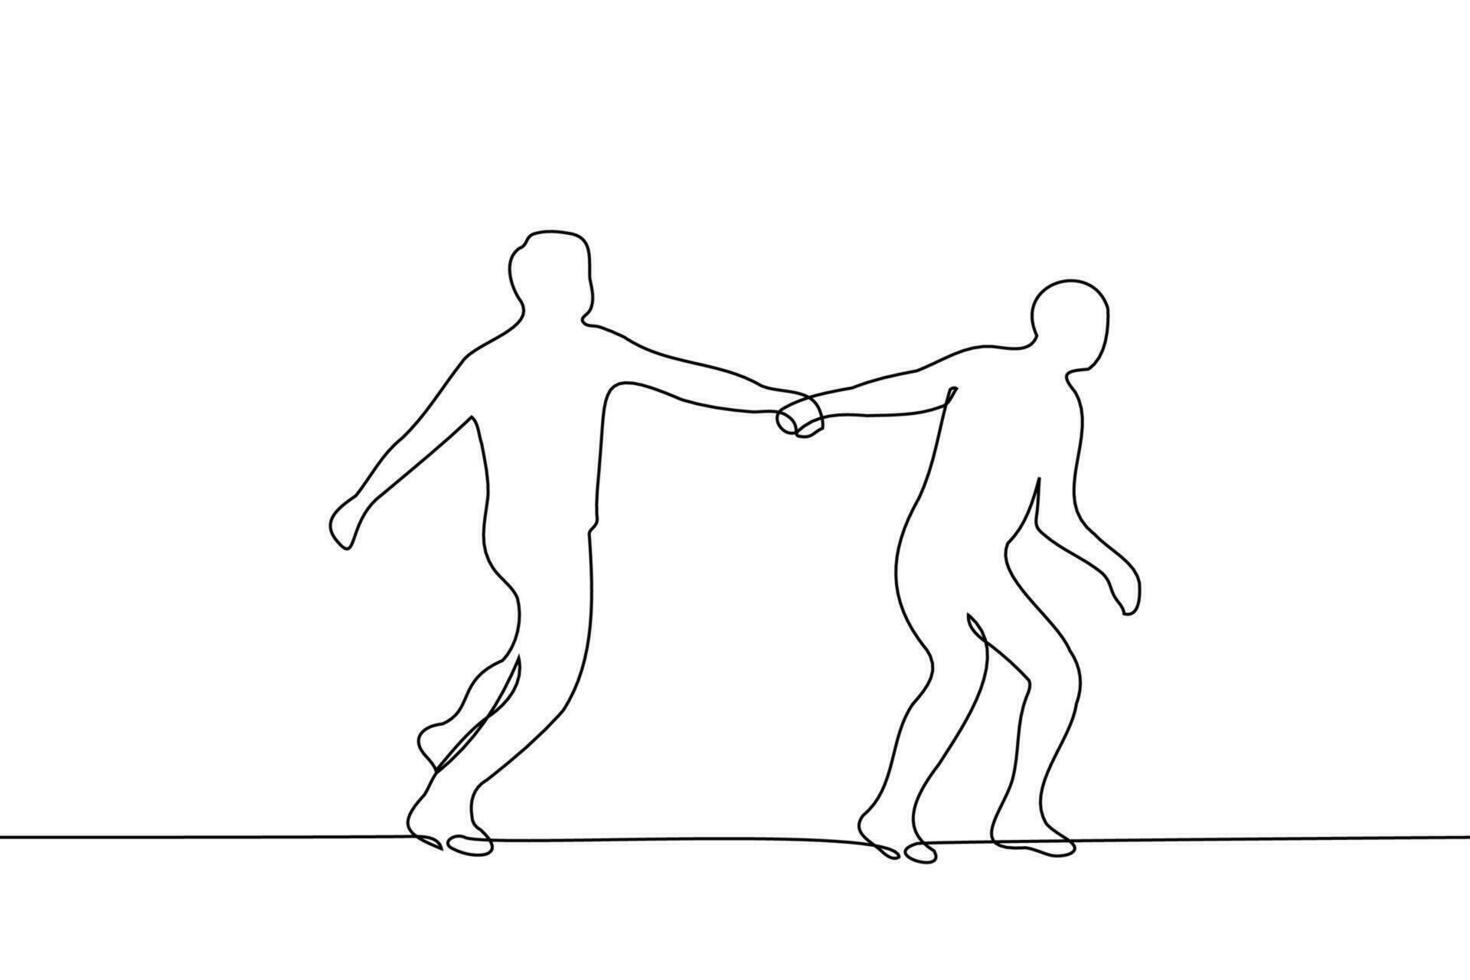 man runs grabbing the hand of another - one line drawing vector. concept silhouette of running people one of which leads vector